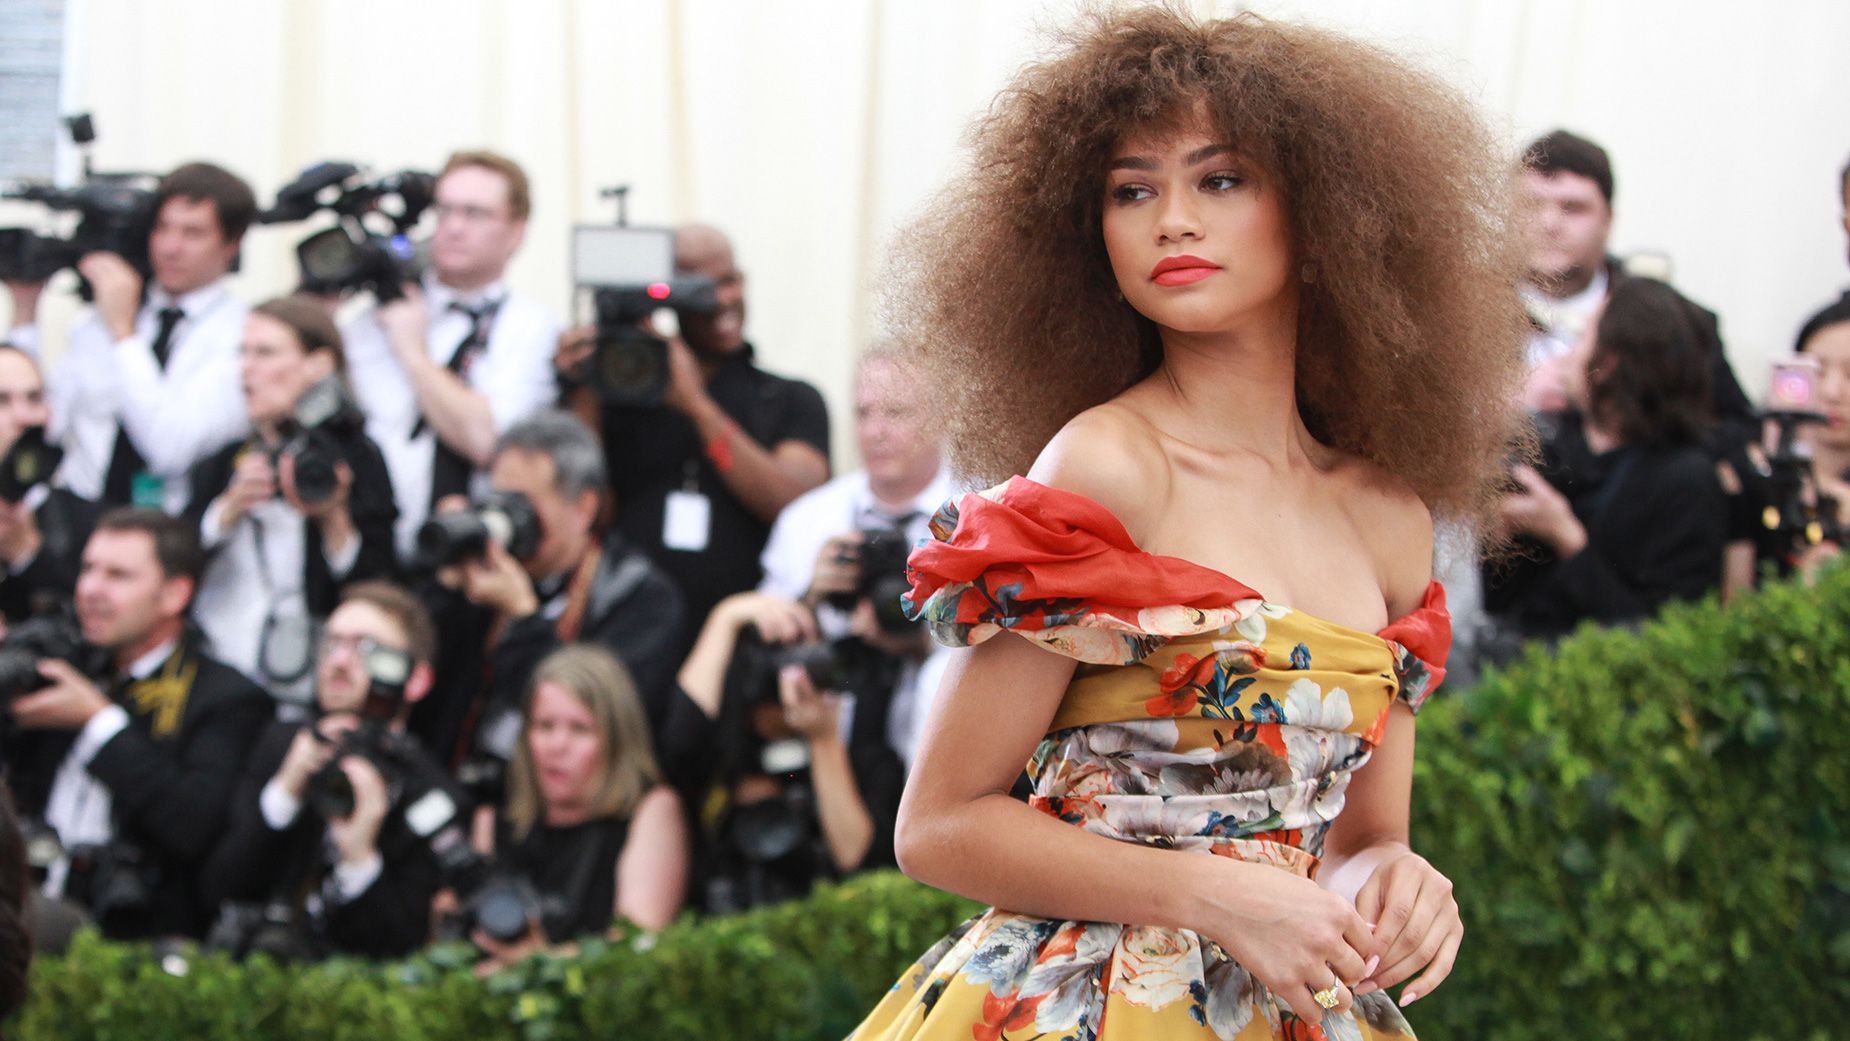 Zendaya’s long-awaited return to the Met Gala is coming with a new title — she'll be co-chair of the event alongside Jennifer Lopez, Bad Bunny, Chris Hemsworth and Vogue editor-in-chief Anna Wintour.